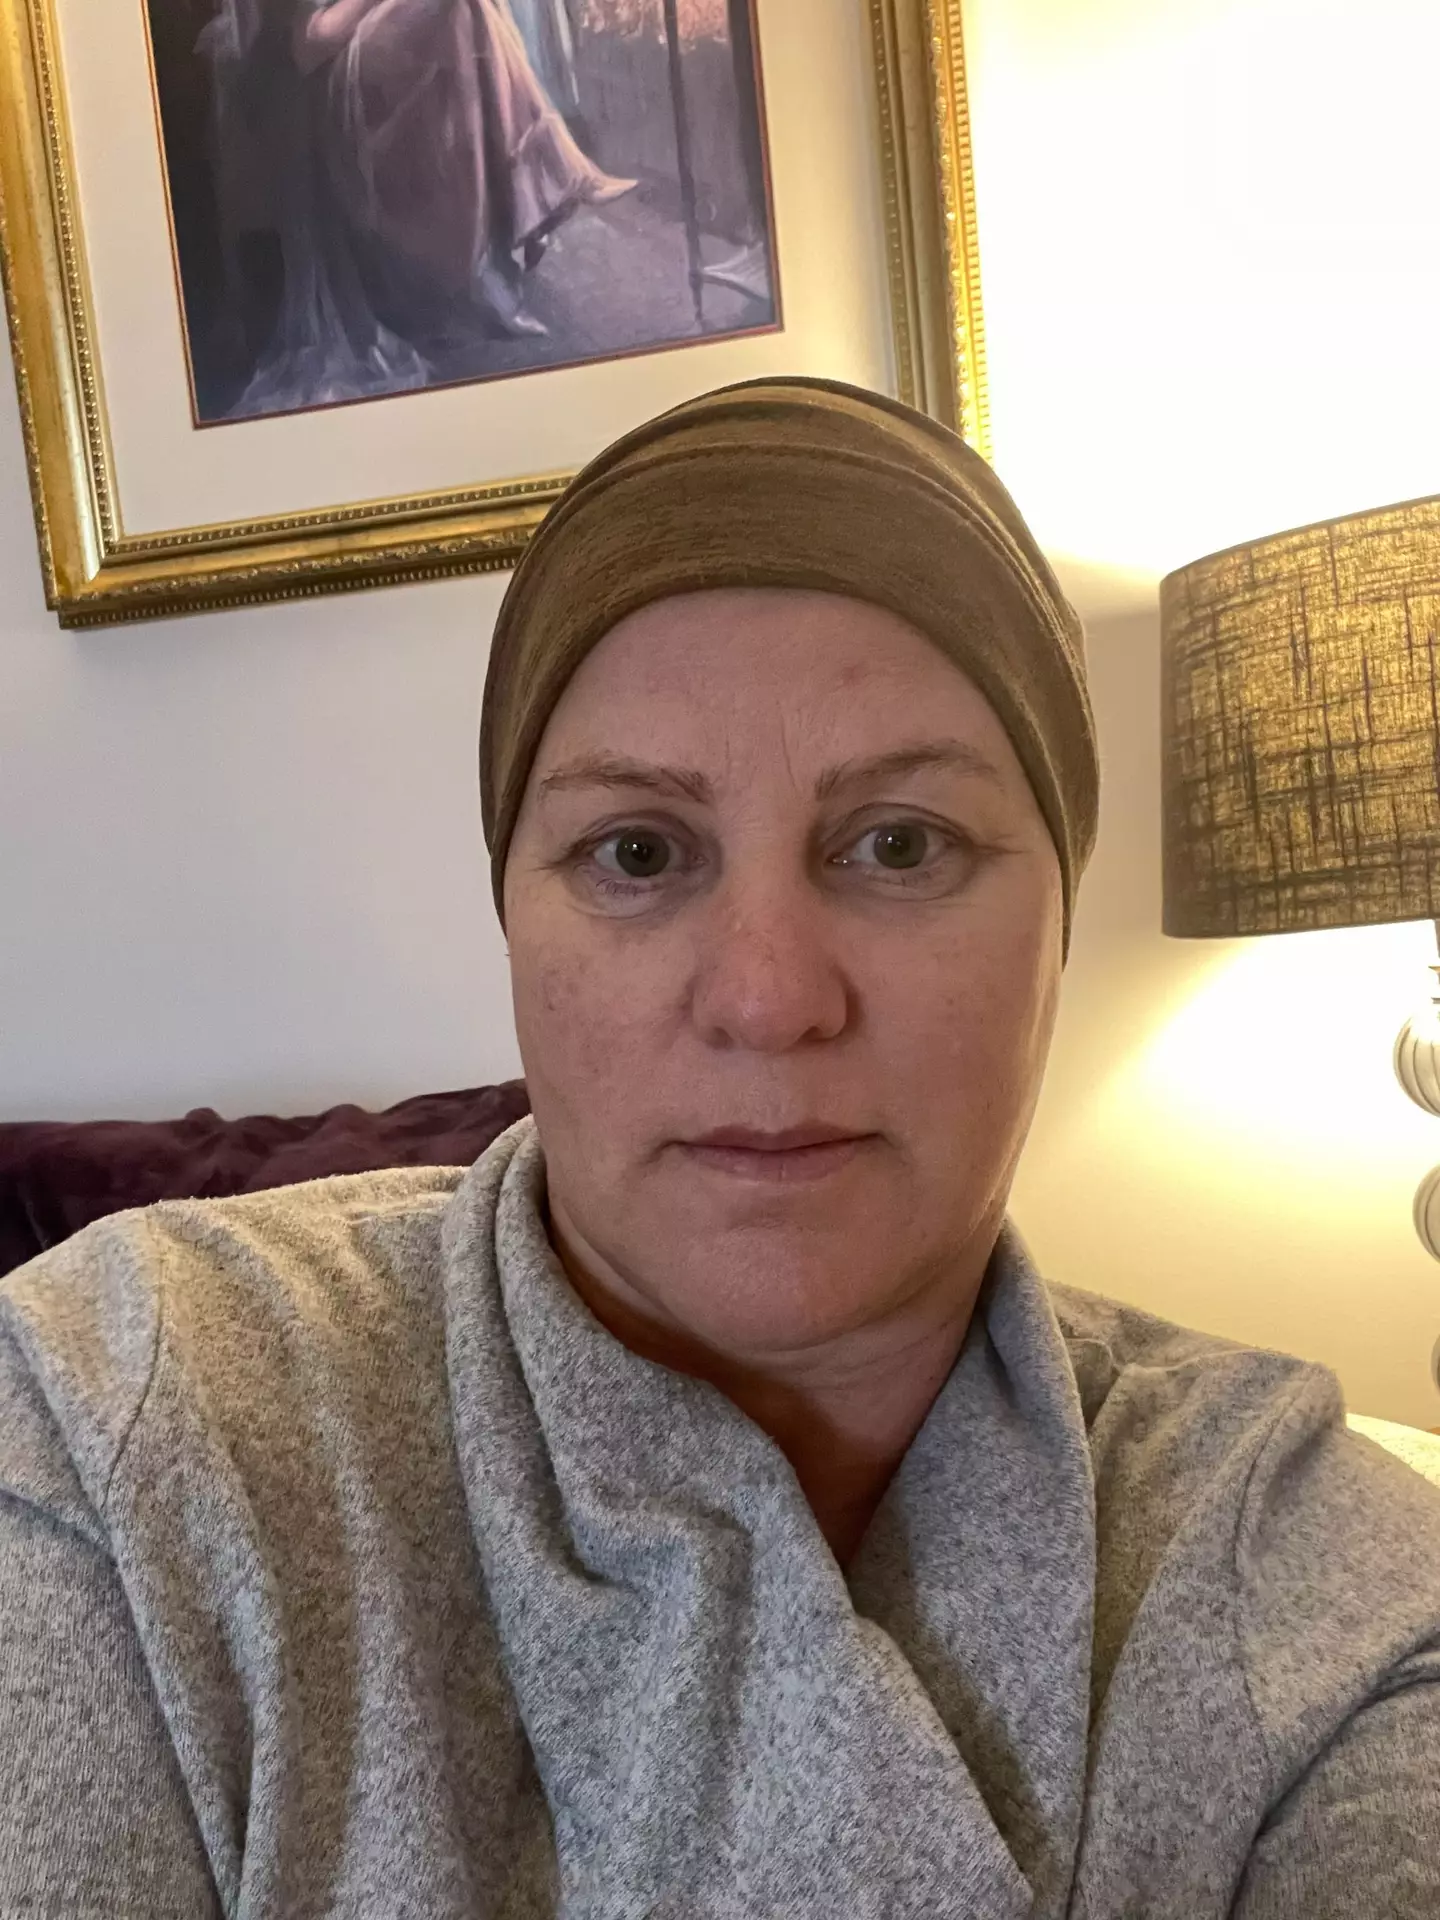 Catherine Jewers has had to make the heartbreaking choice to cancel Christmas after her cancer diagnosis.